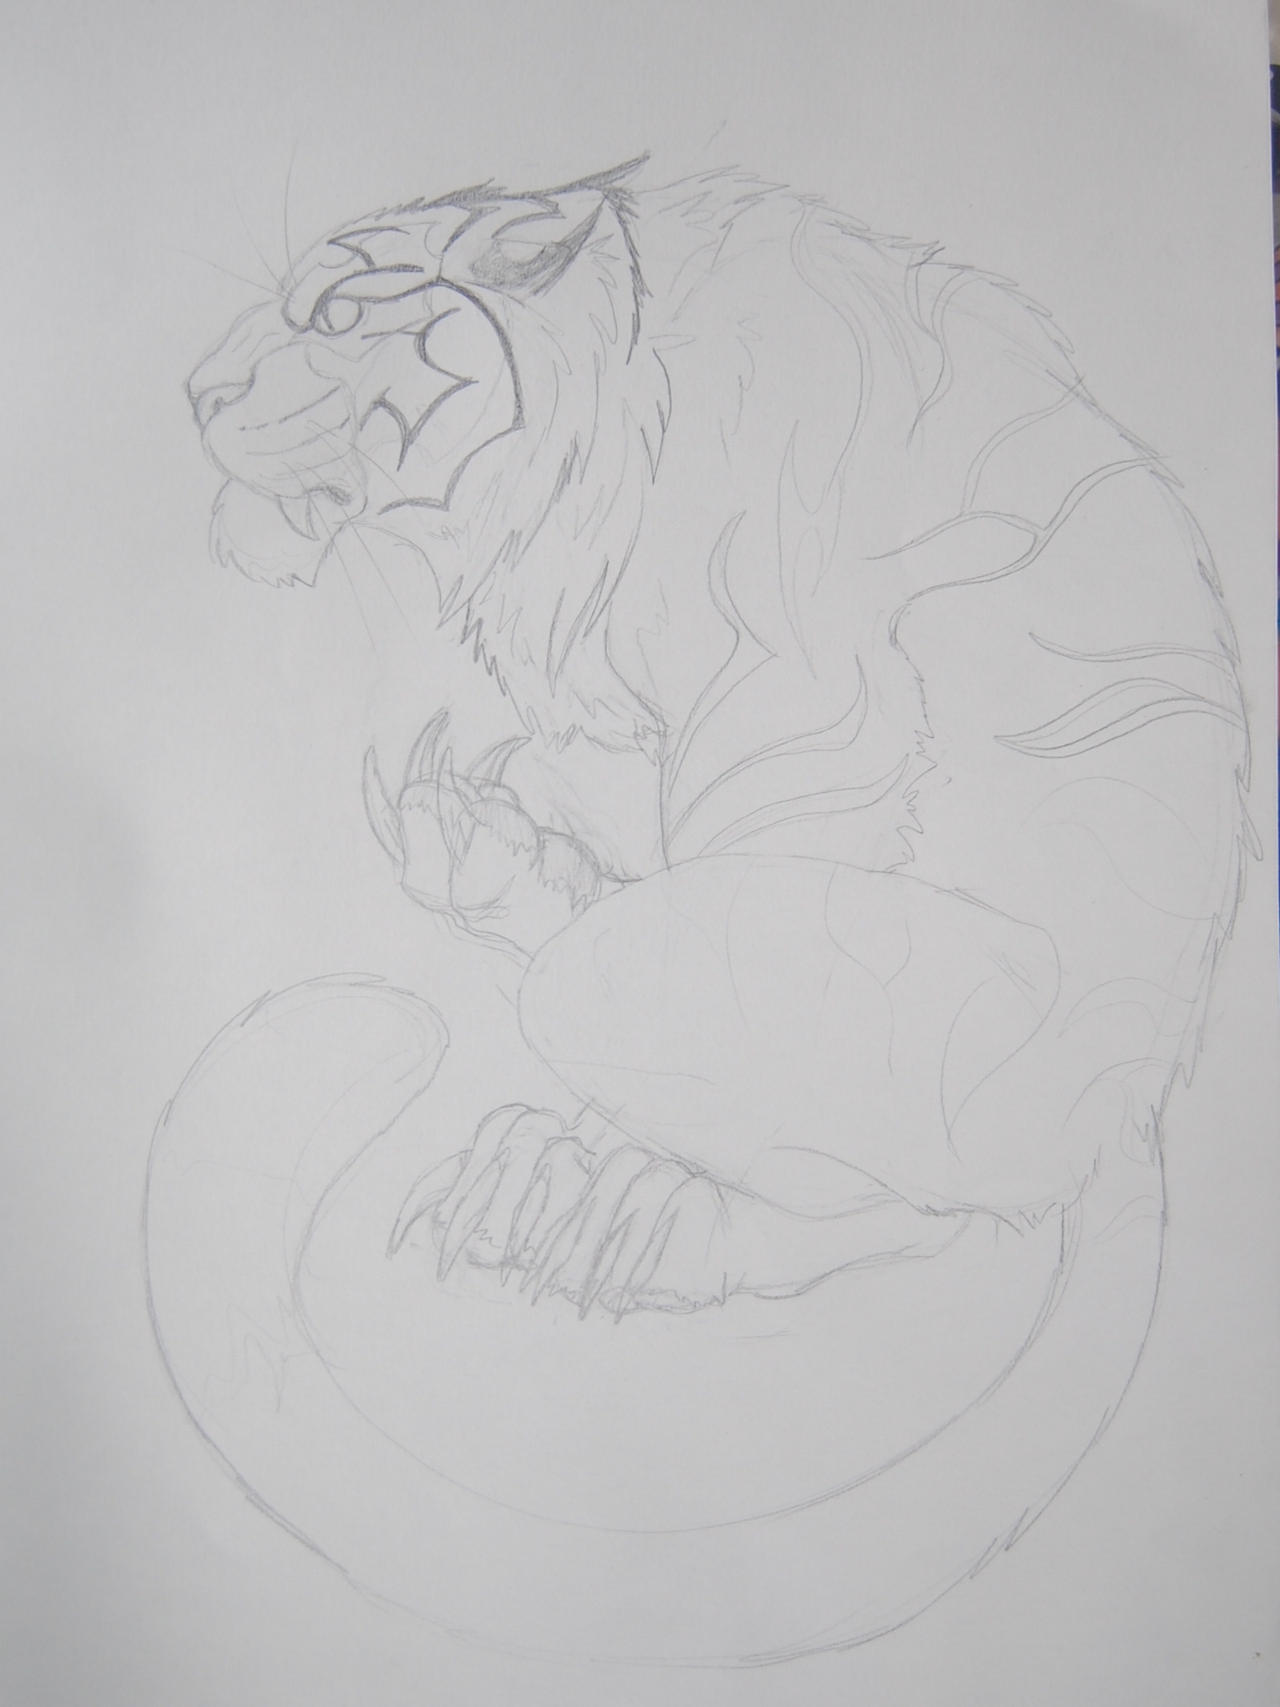 tiger tattoo design part 1 by